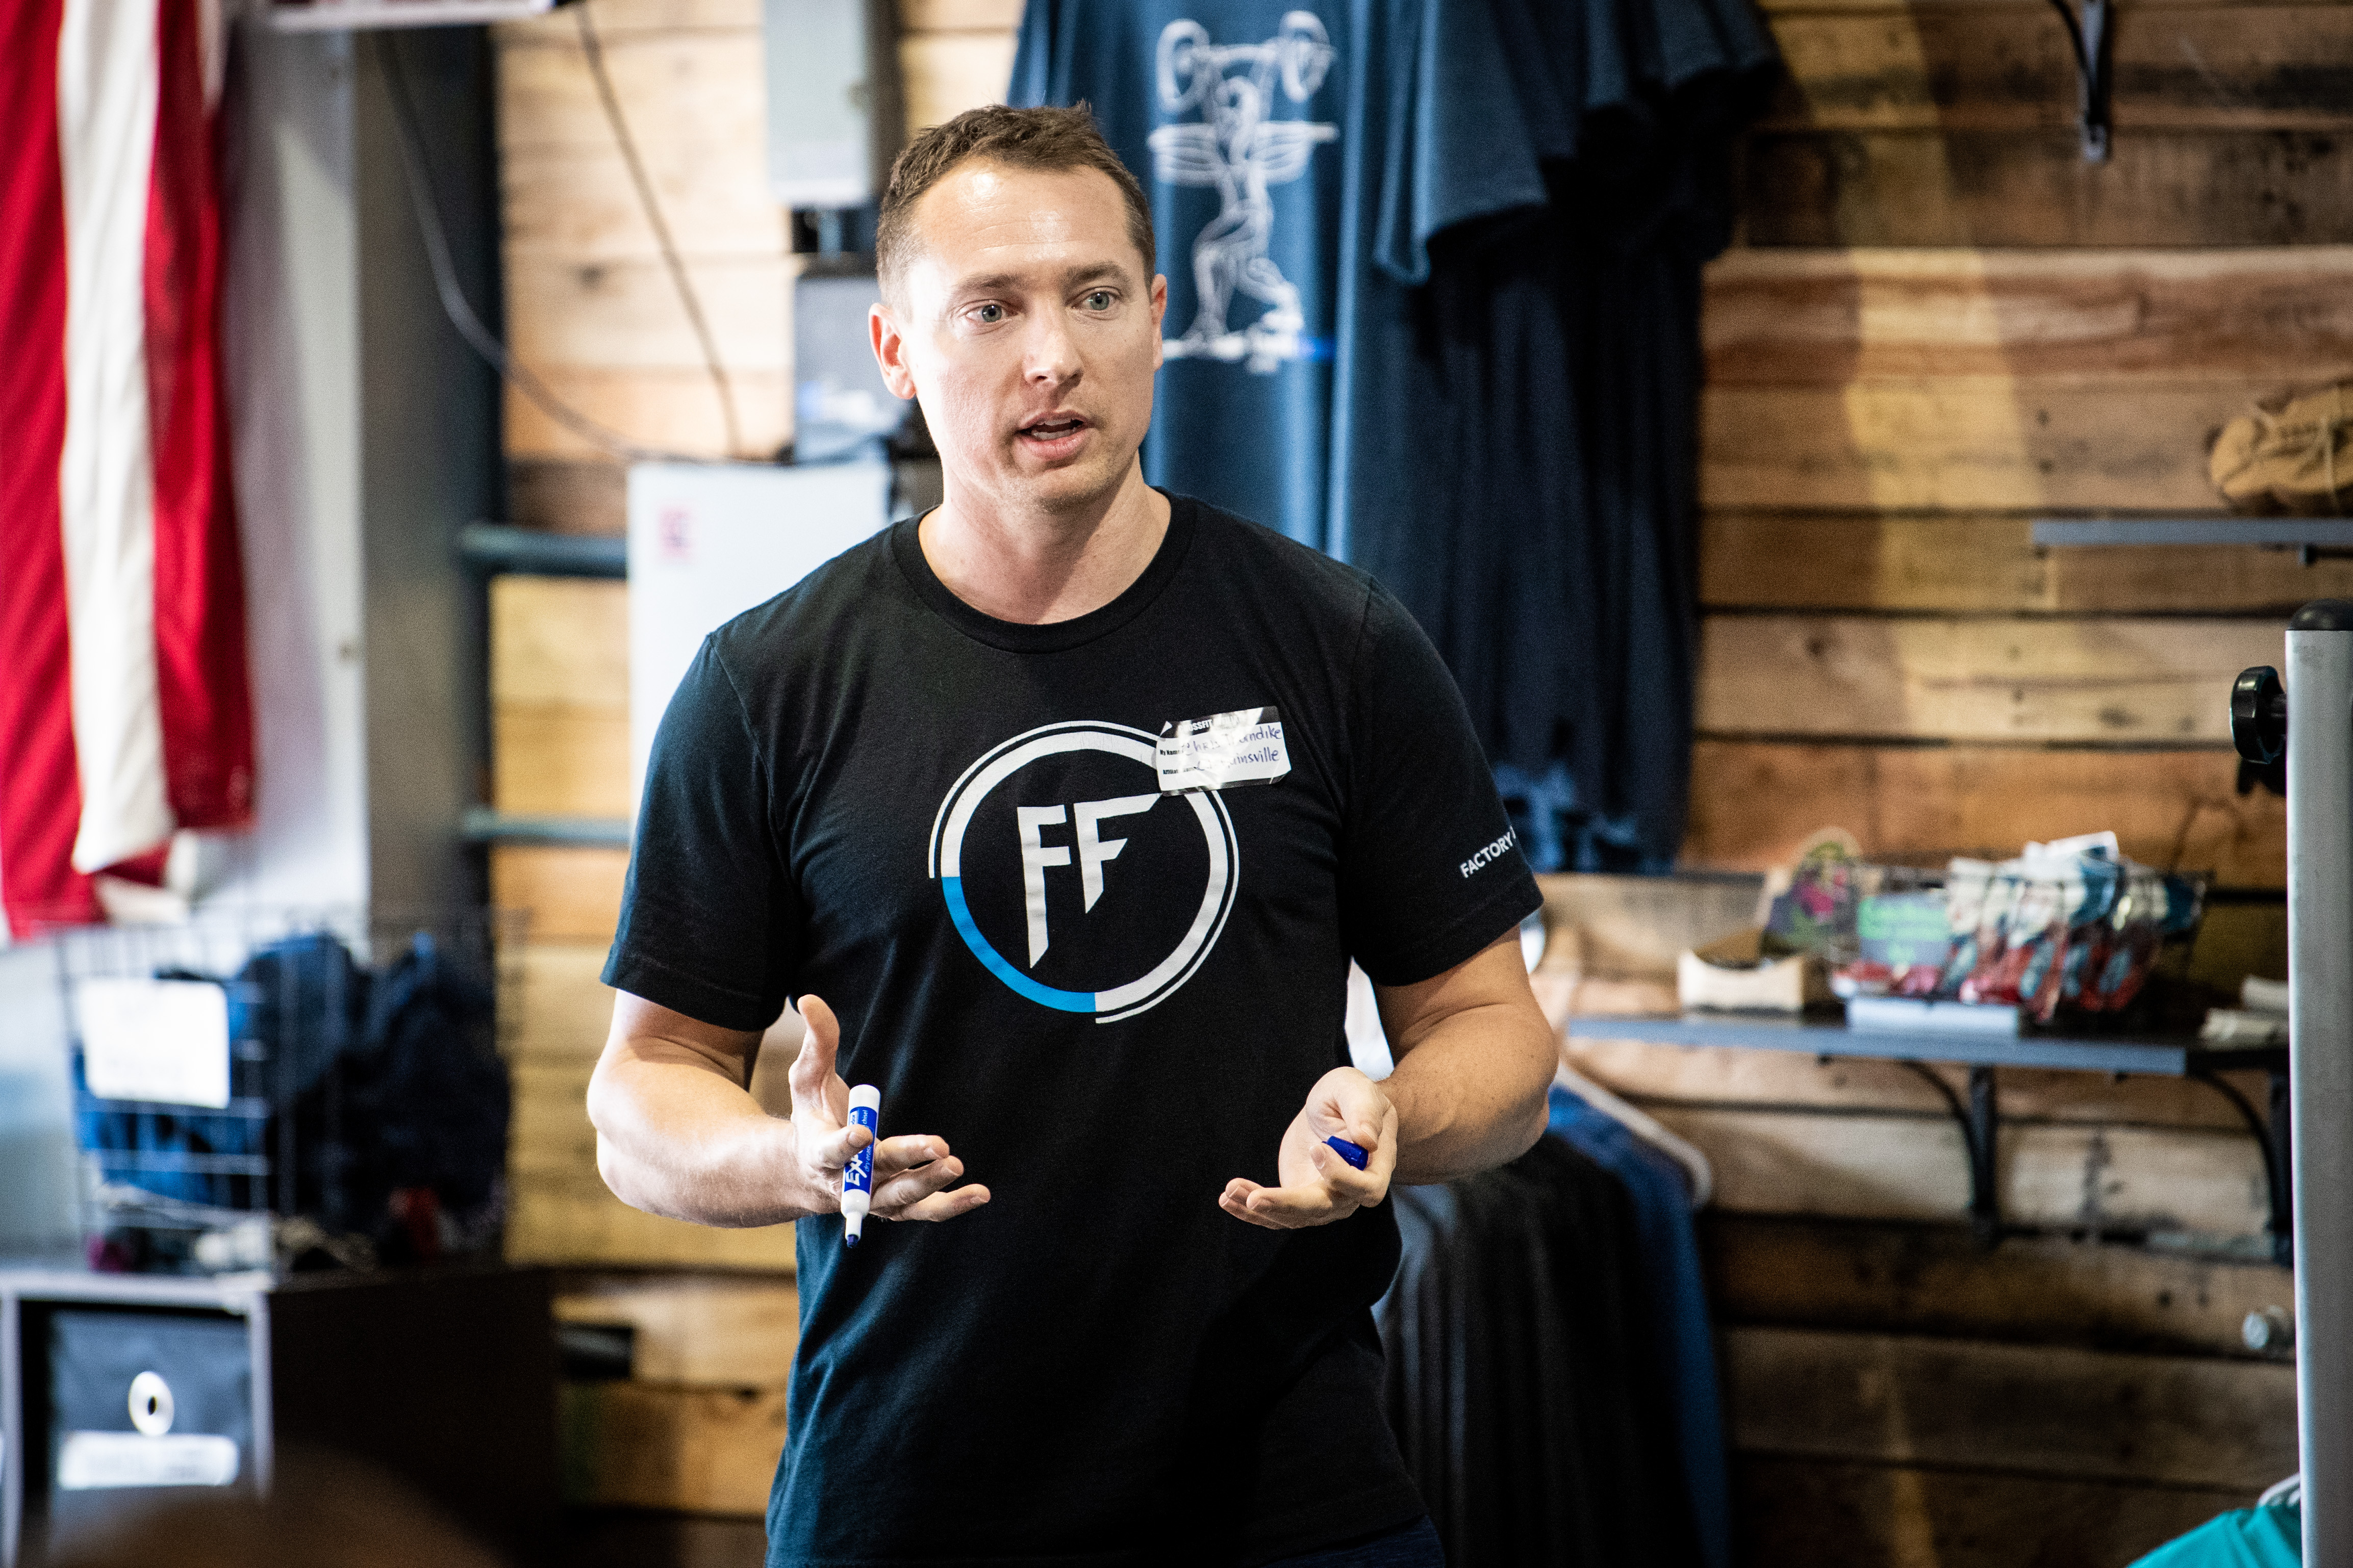 Chris Thorndike is an expert sales and scaling business coach for group fitness owners